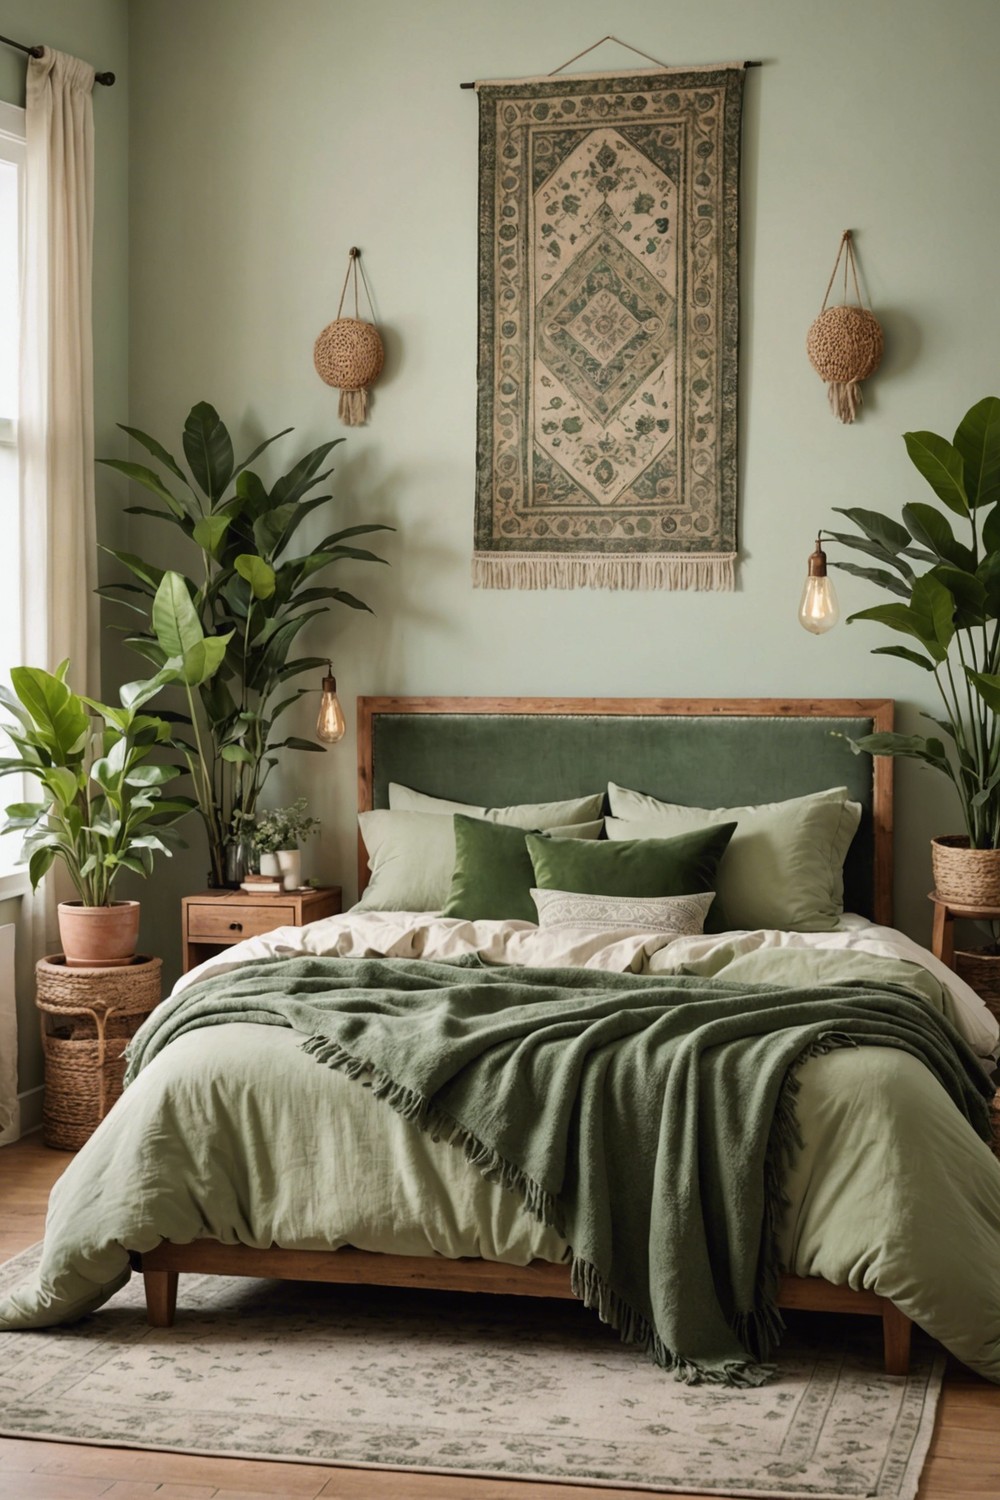 Use Sage Green as an Accent Color in a Neutral Room